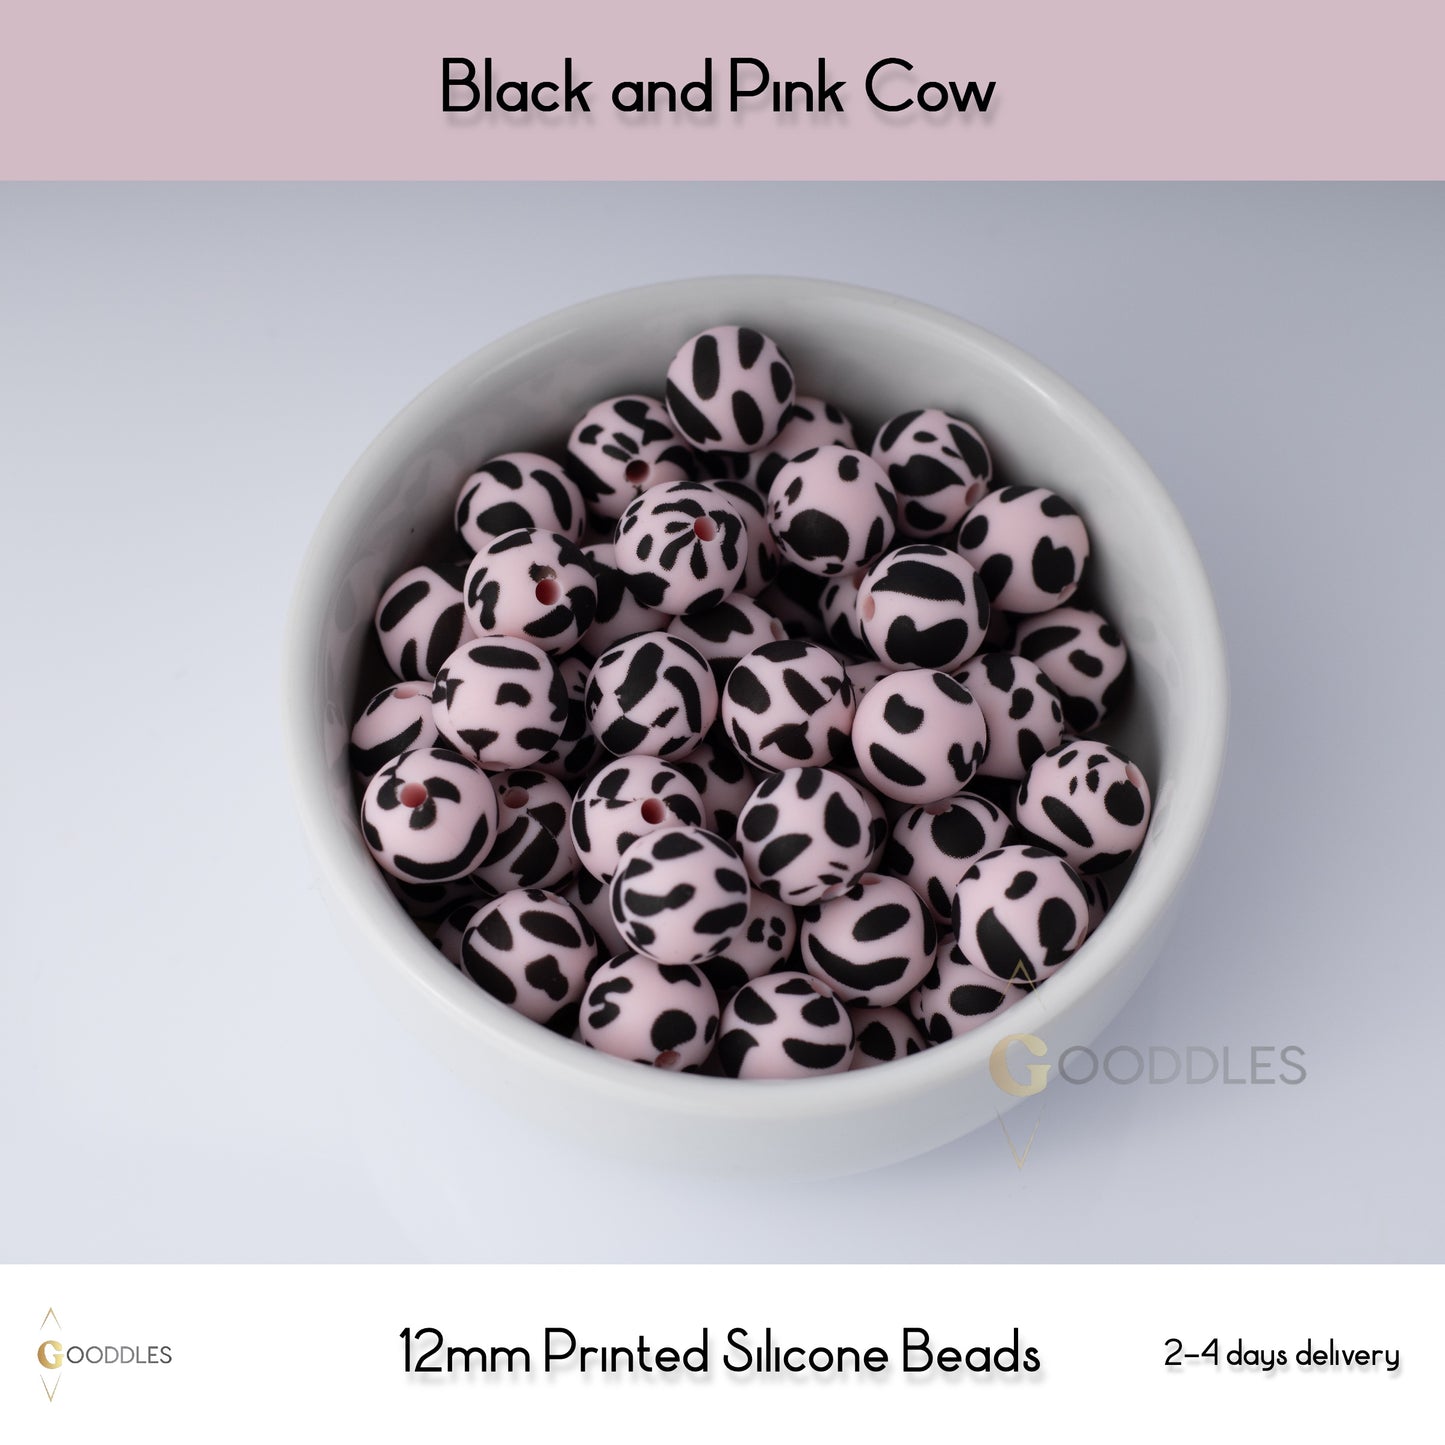 5pcs, Black and Pink Cow Silicone Beads Printed Round Silicone Beads